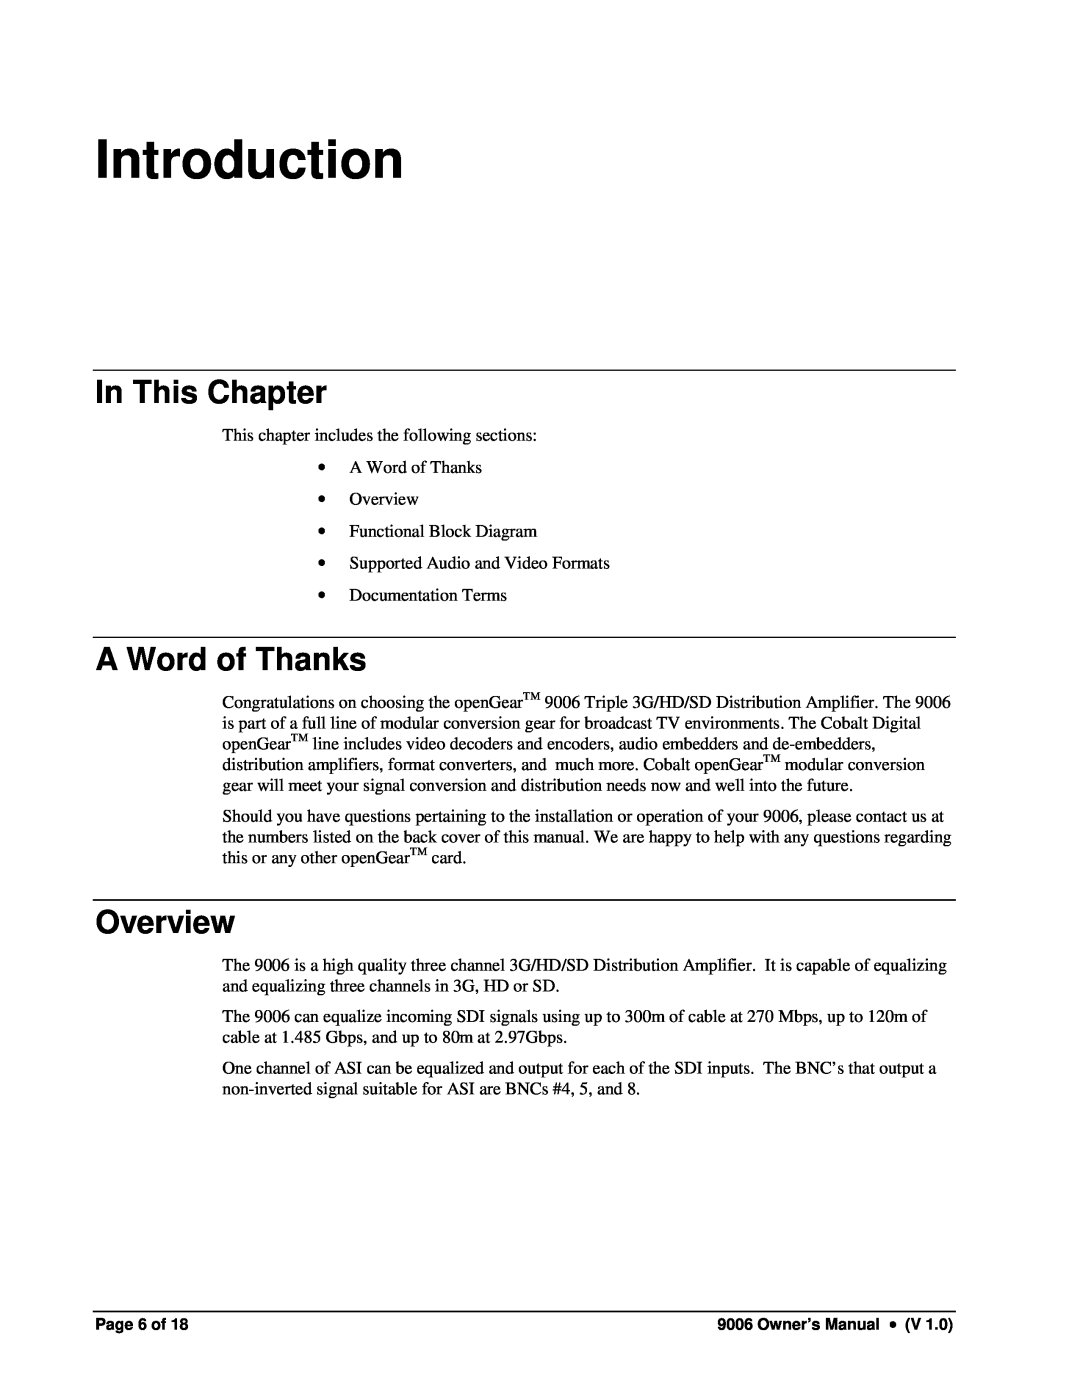 Cobalt Networks 9006 owner manual Introduction, In This Chapter, A Word of Thanks, Overview 